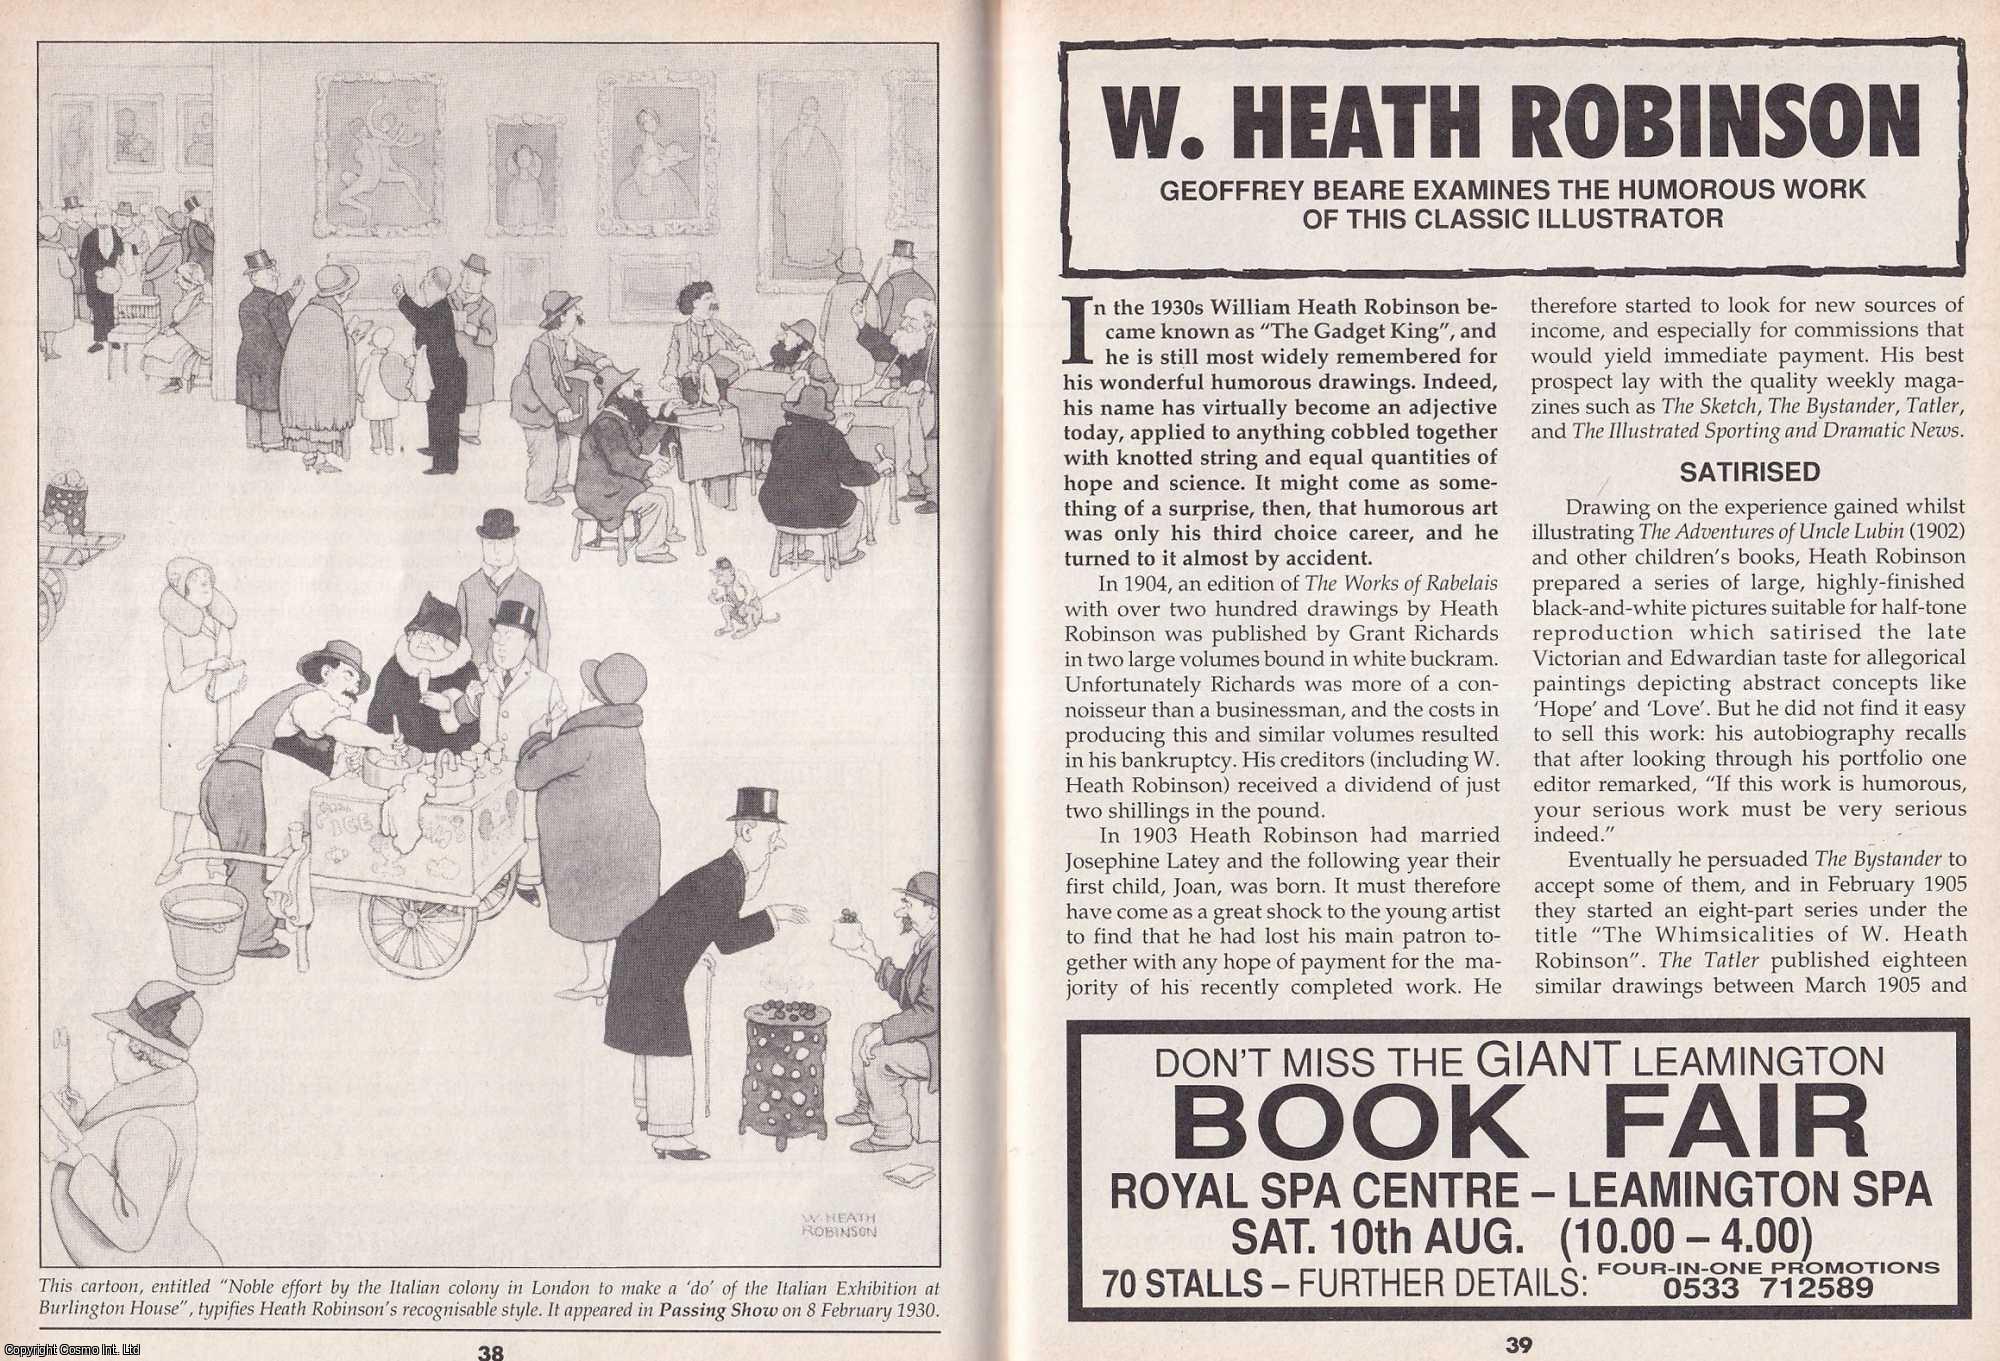 Geoffrey Beare - W. Heath Robinson. Examining The Humorous Work of this Classic Illustrator. This is an original article separated from an issue of The Book & Magazine Collector publication.